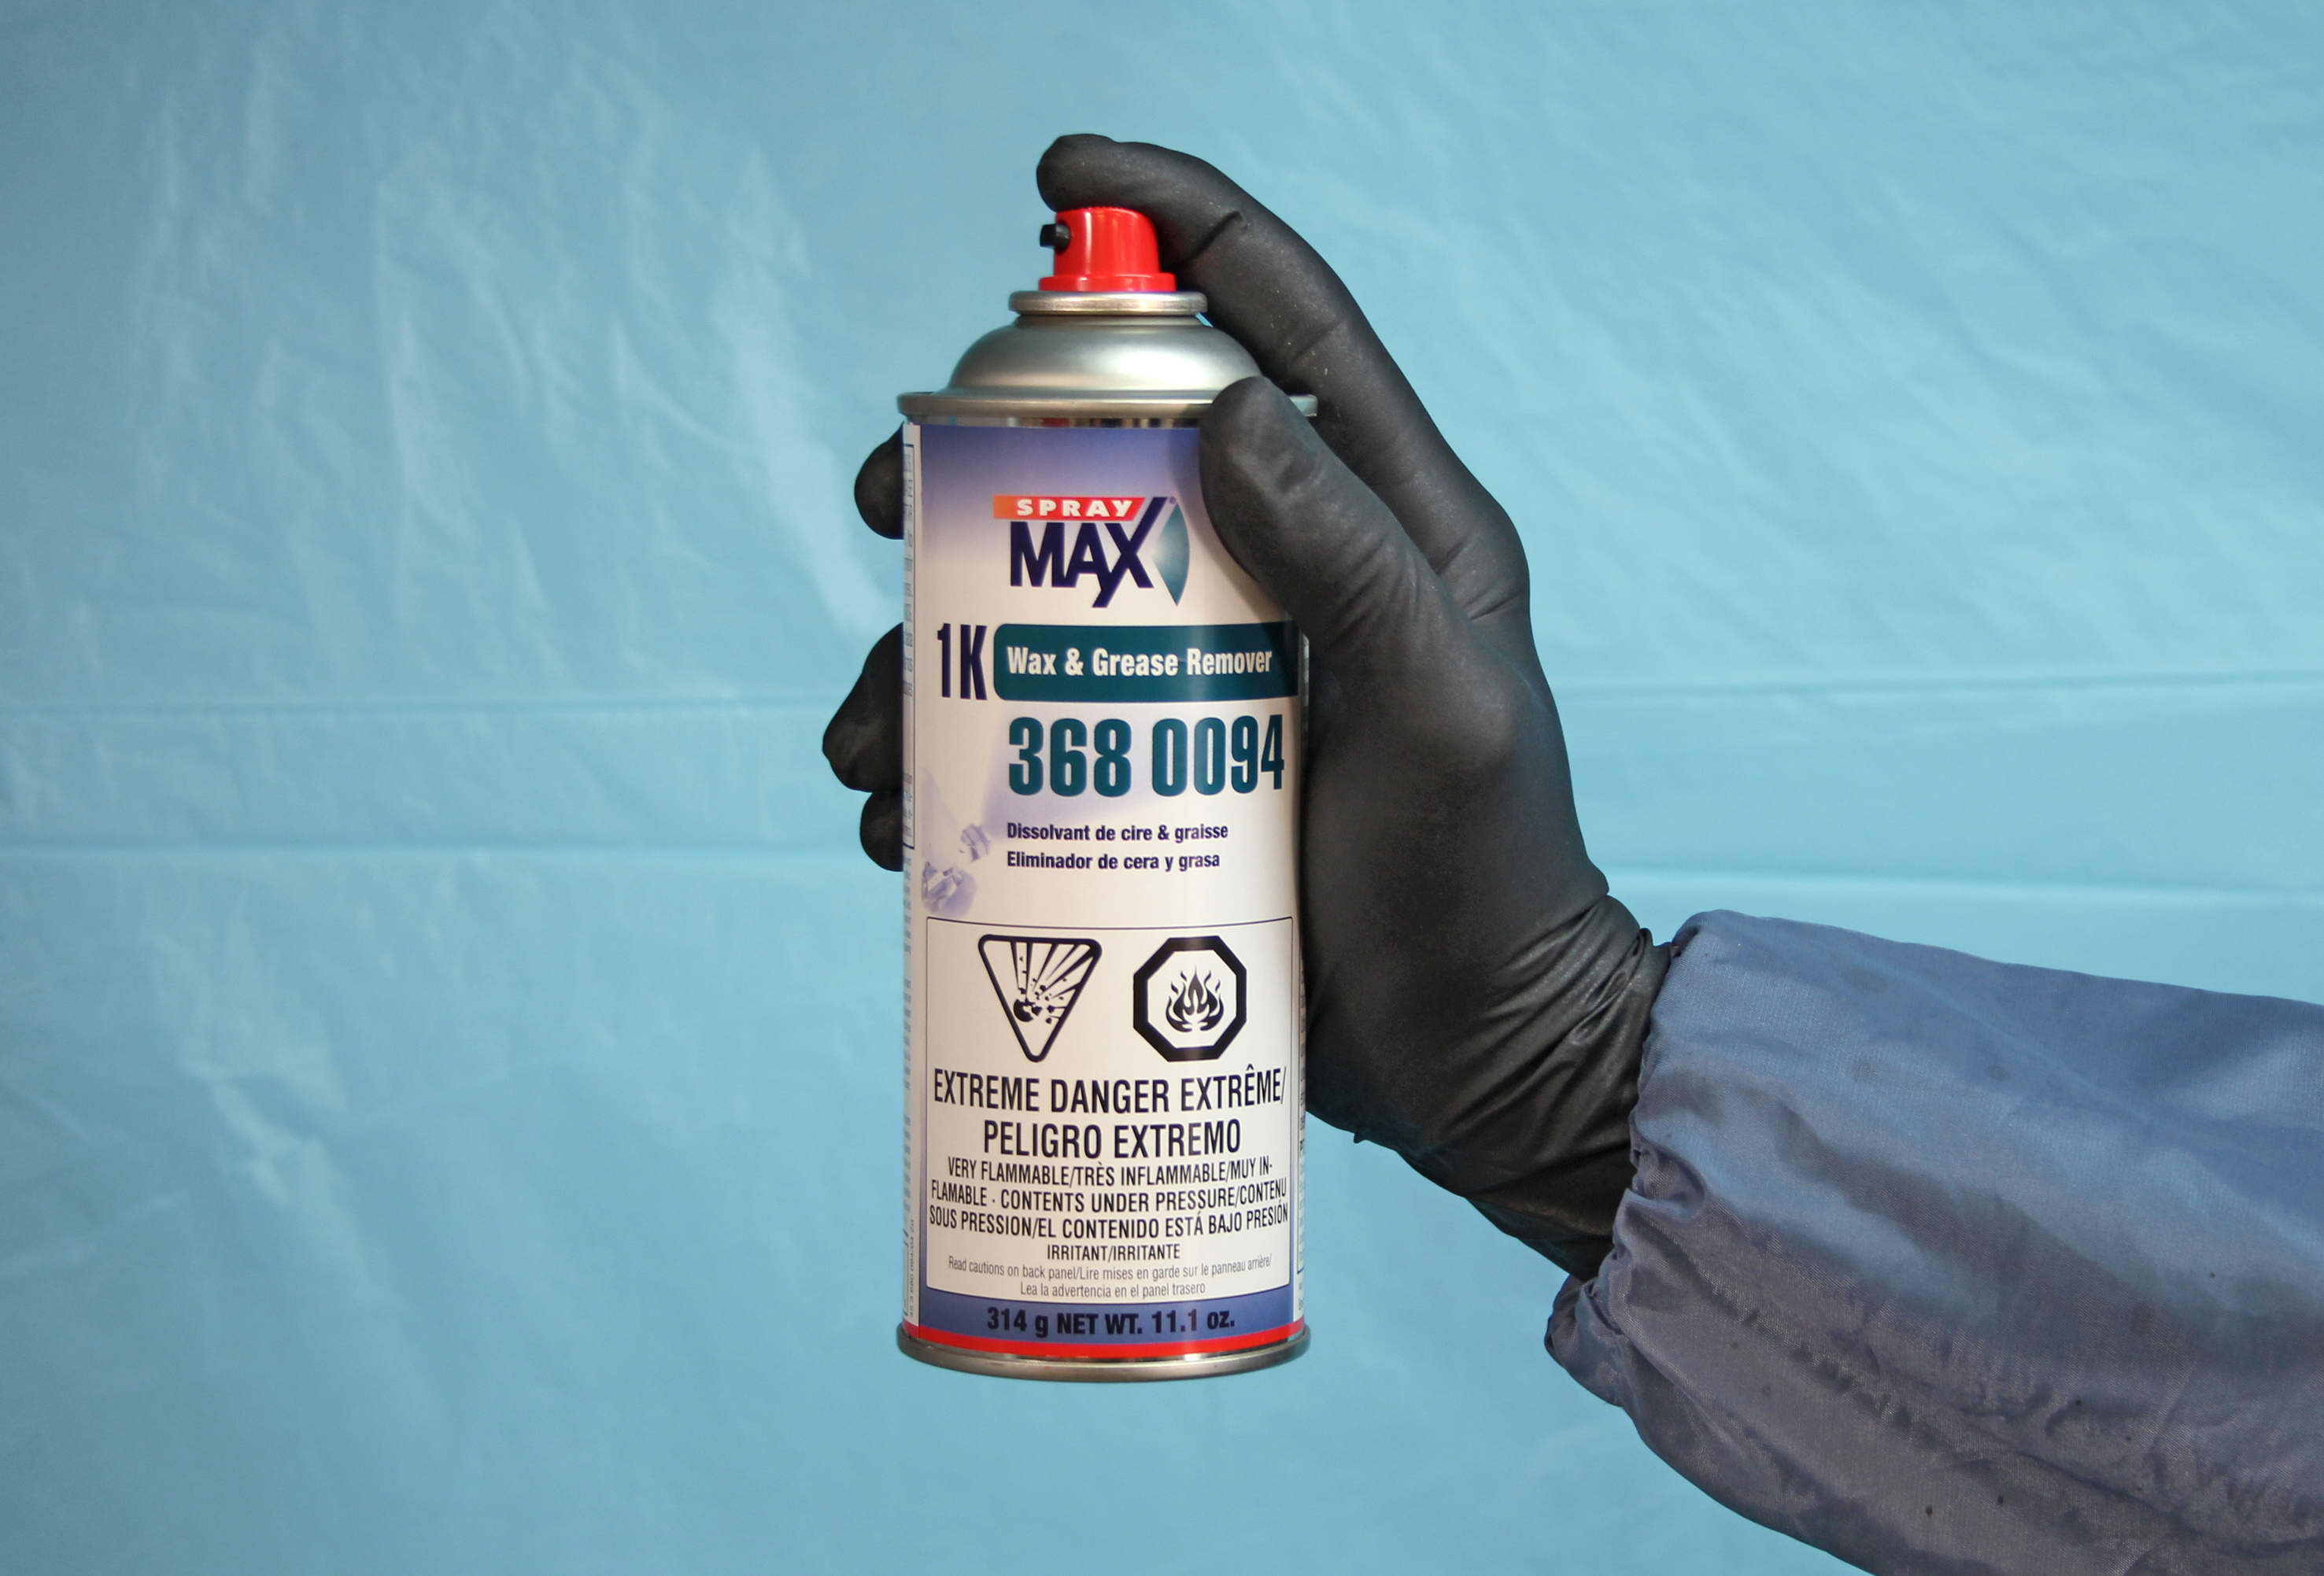 SprayMax 3680094 Wax and Grease Remover